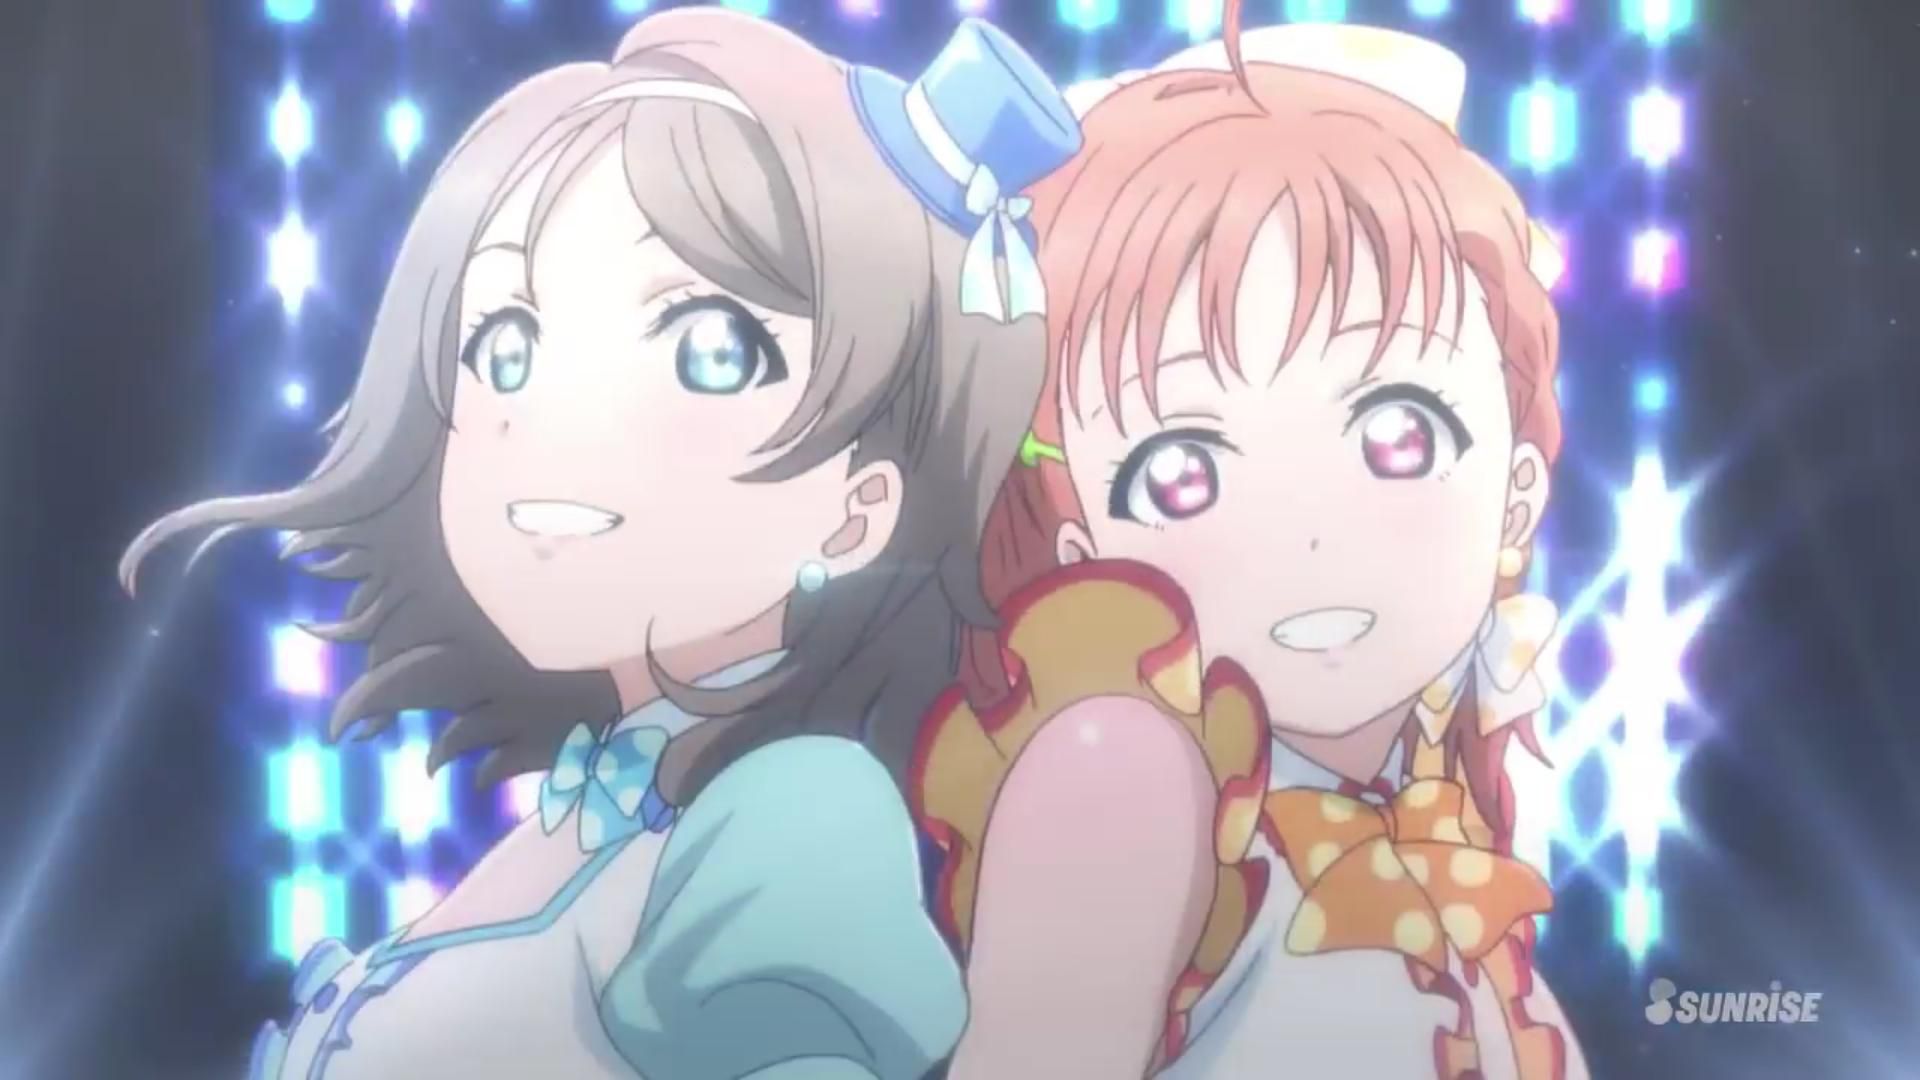 [Image] "love live! Sunshine "1000 songs she bend was its cute scene image competitions wwwwwwwwww 11